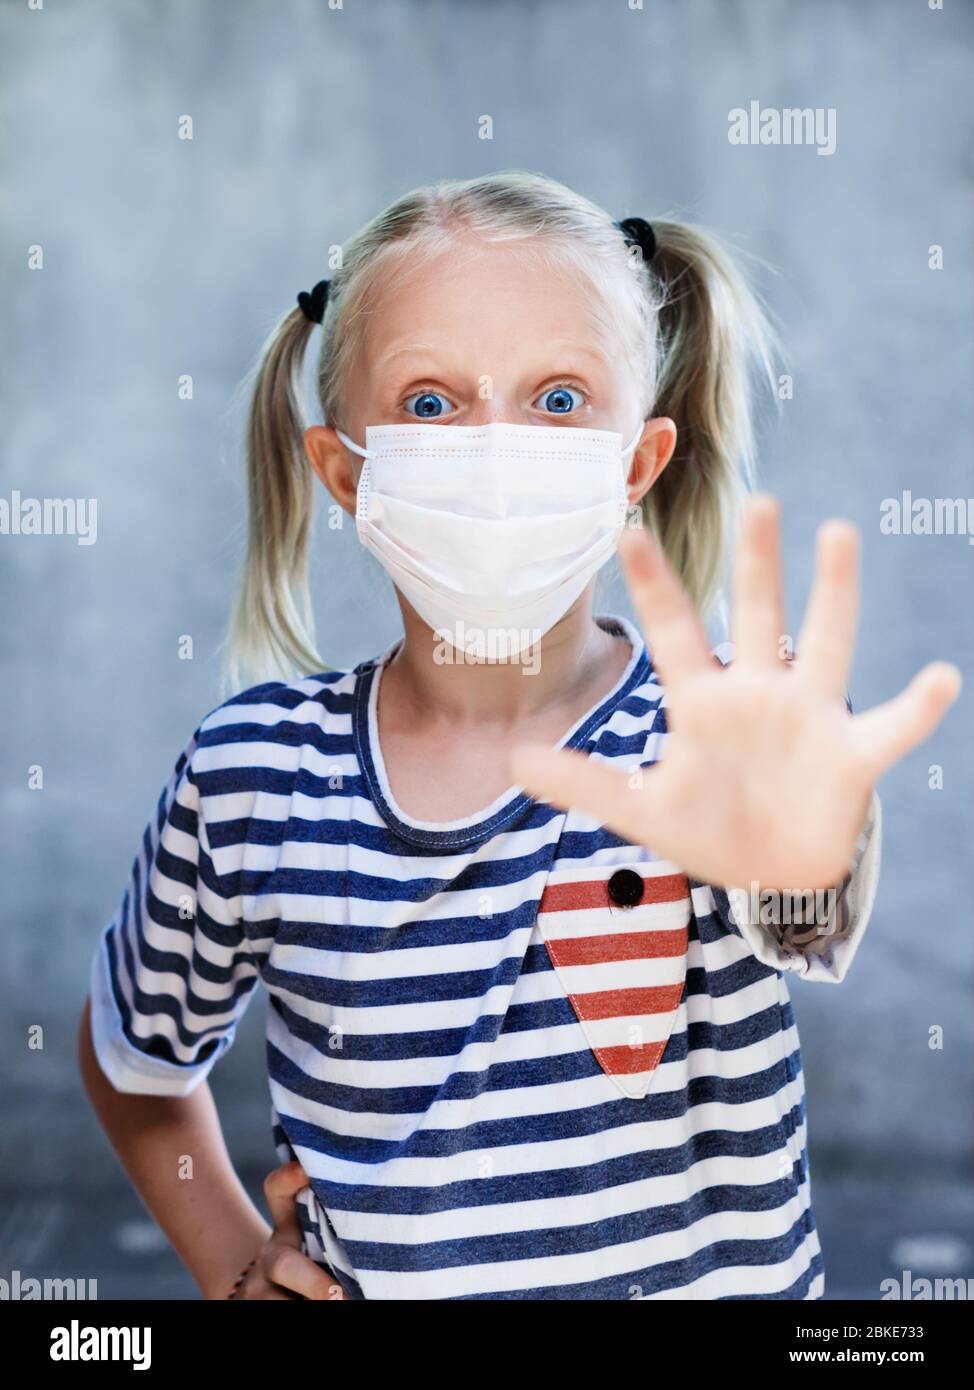 Little child showing hand gesture Stop virus. Kid wearing medical face masks go out for outside walk after staying at home due banned street activity. Stock Photo